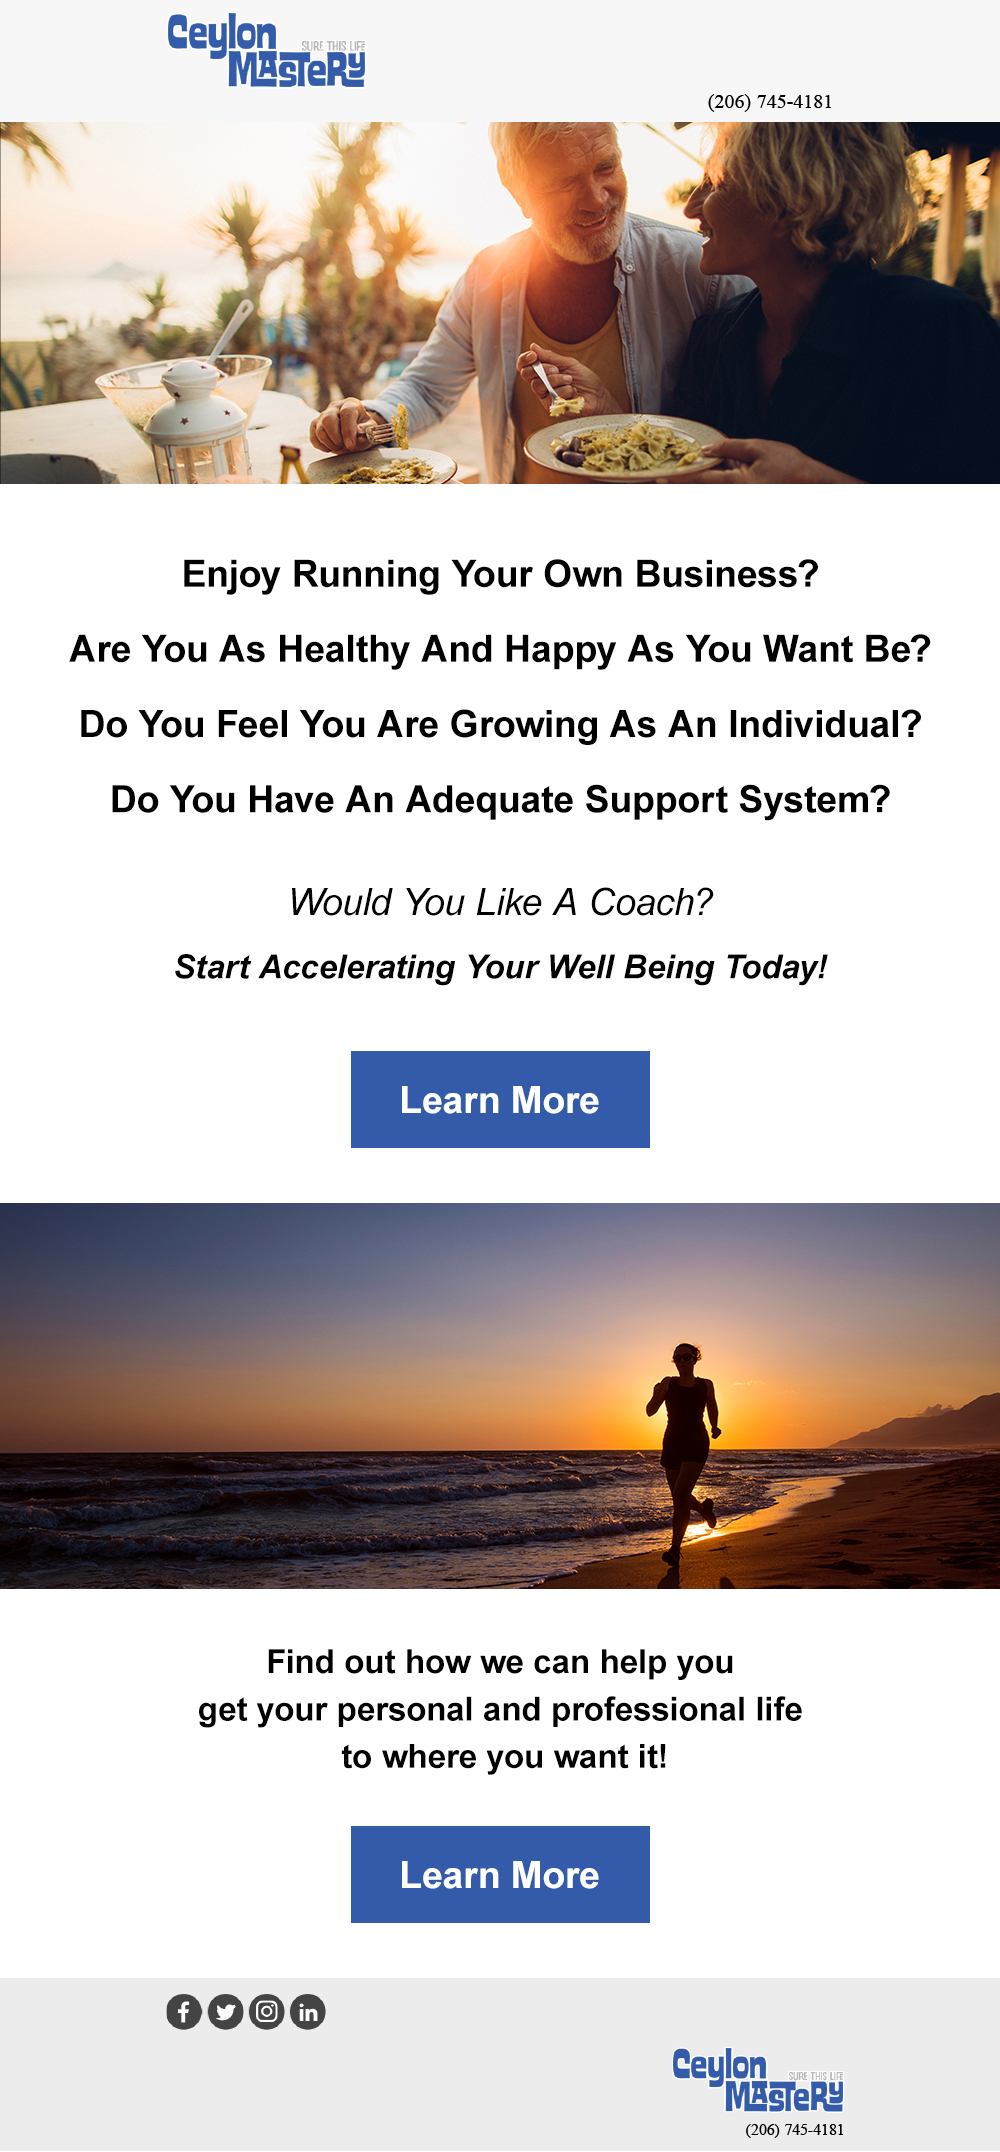 Email marketing newsletter about life coaching with link to learn more. Screenshot.